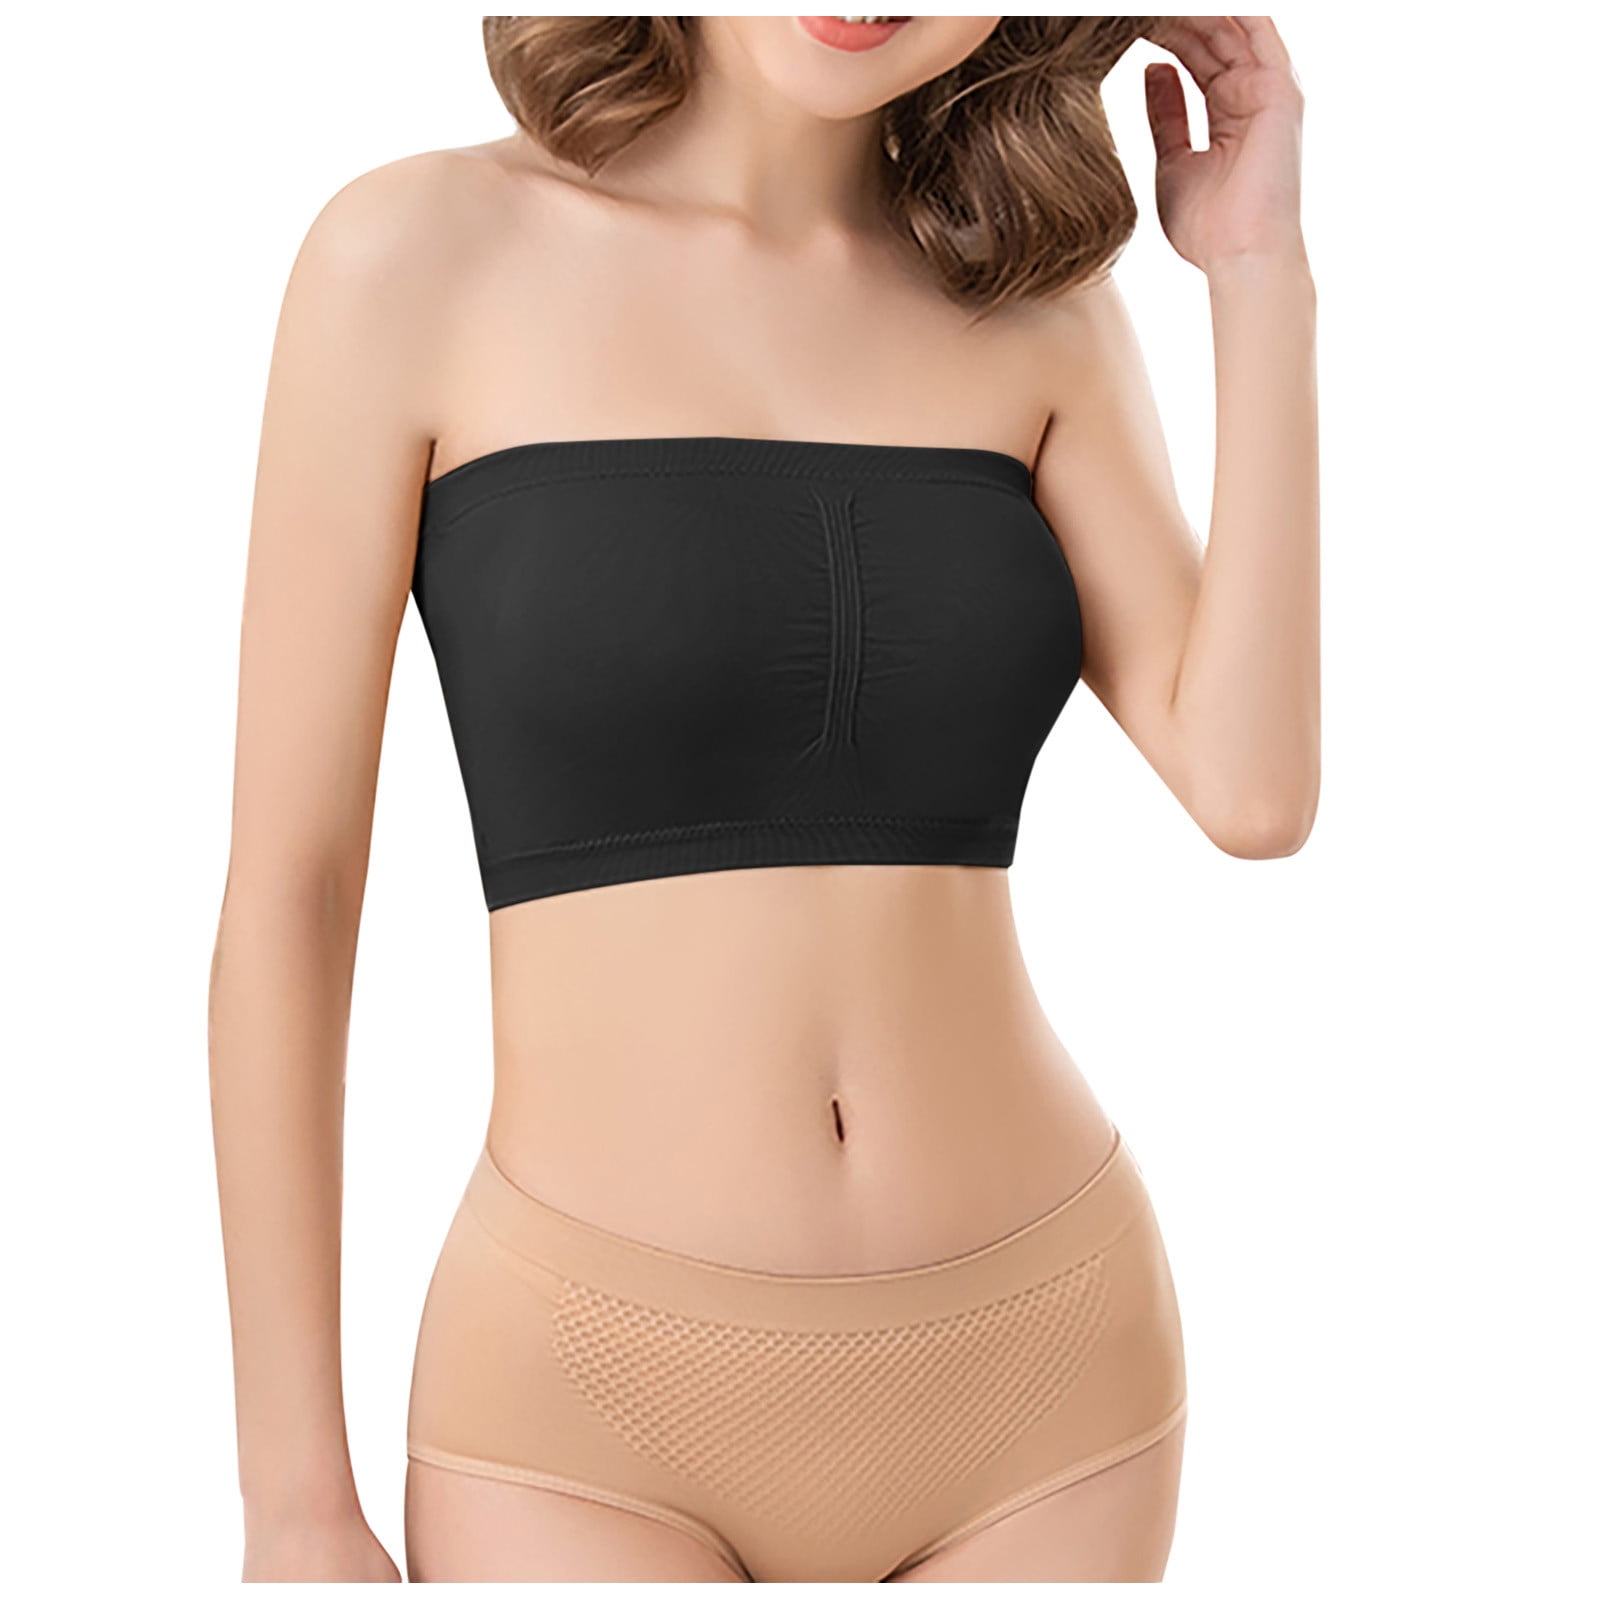 Plus Size Full-Coverage Bra for Women Stretch Strapless Bra,Summer Bandeau  Bra, Strapless Bra,Comfort Wireless Bra Present for Women Up to 65% off 